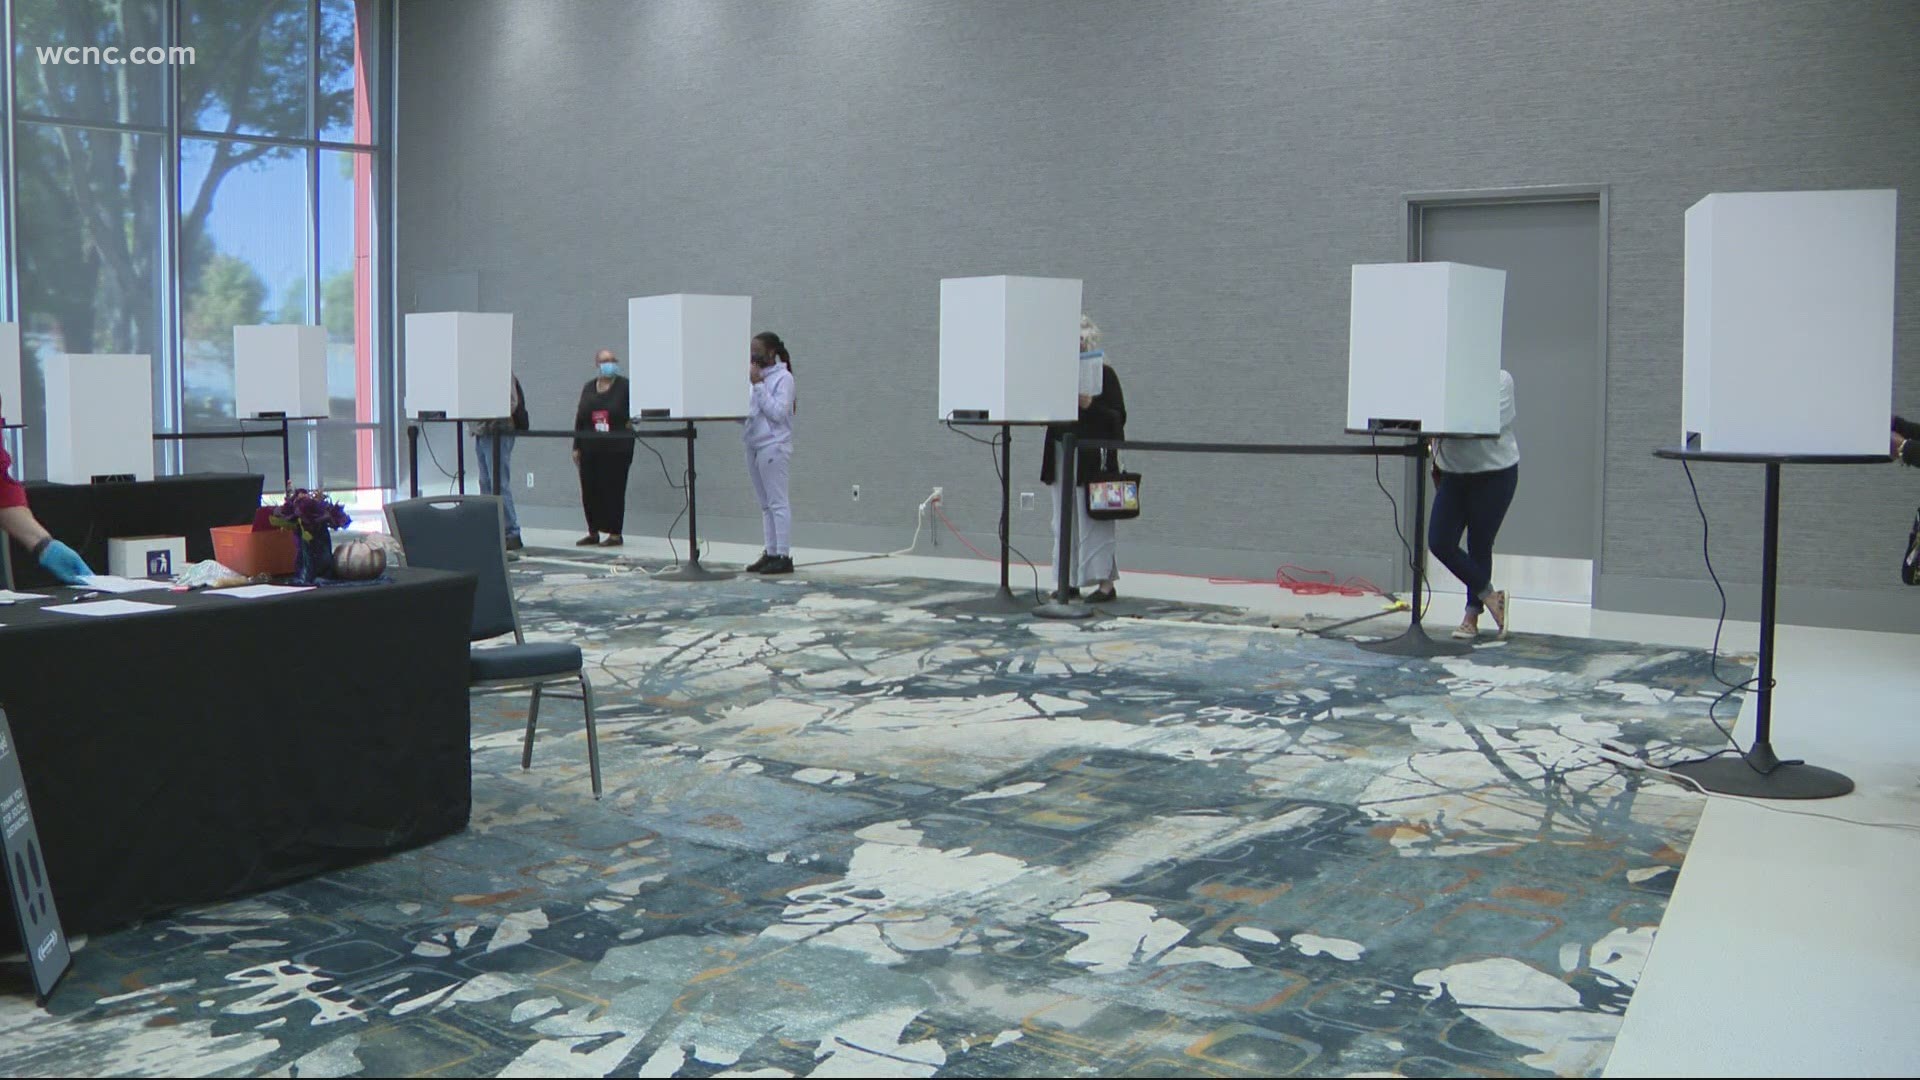 Inside of a polling place, voters can expect two people from each party simply observing what's going on.